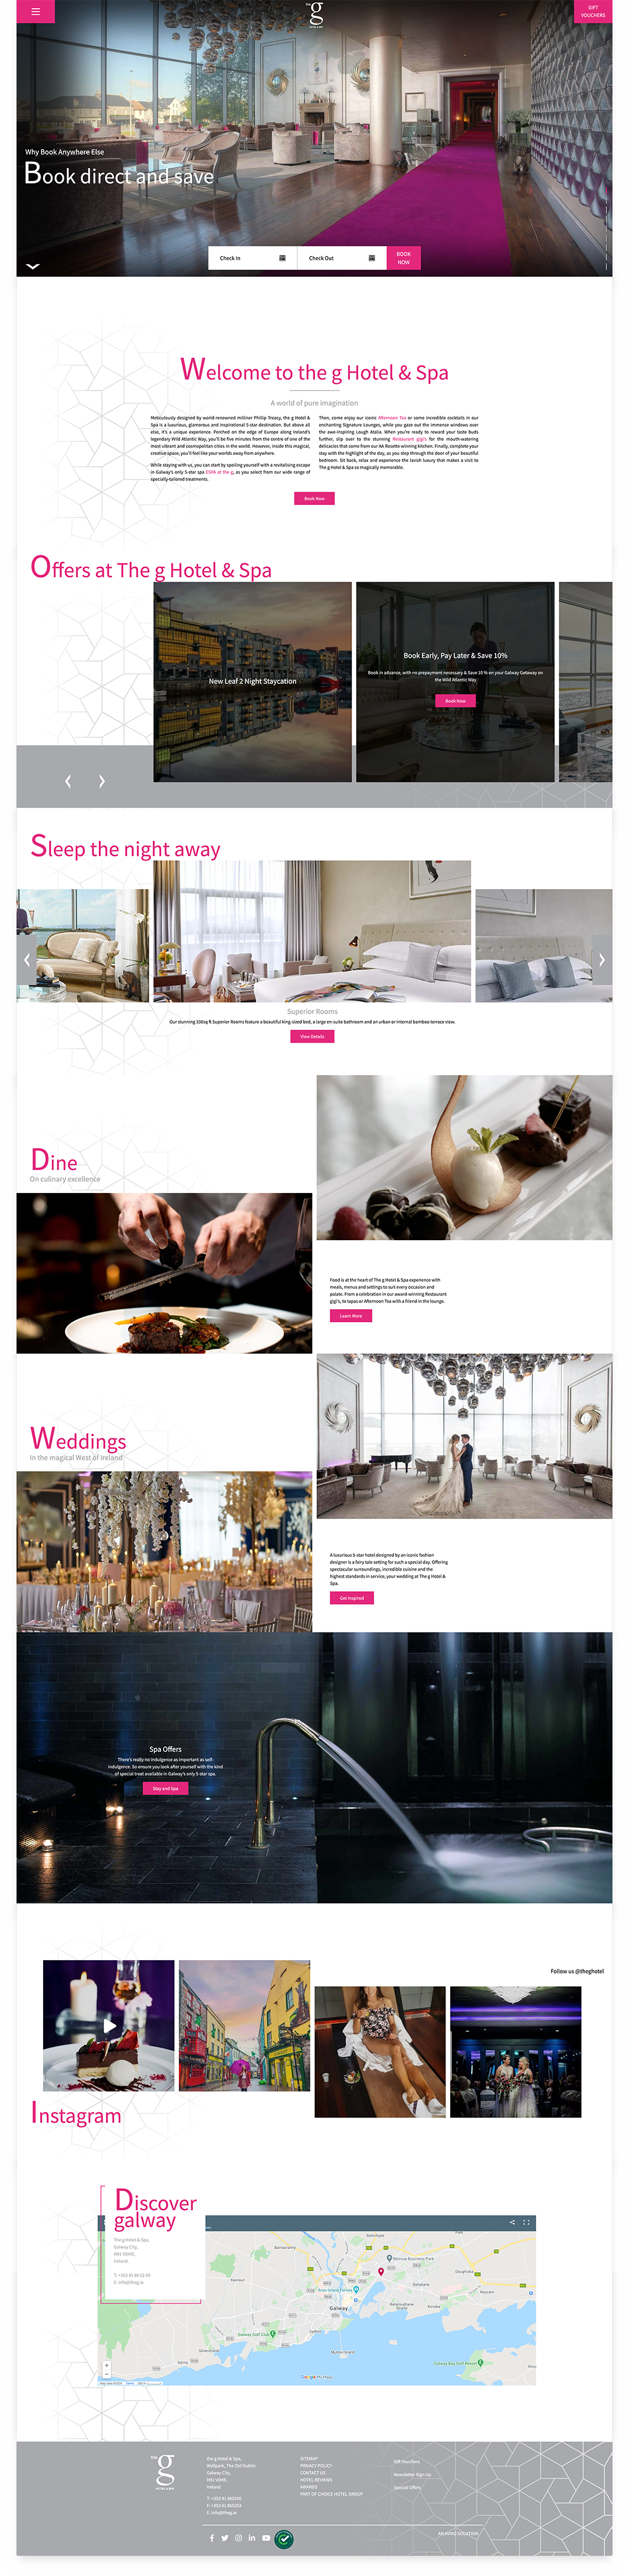 The g Hotel Website layout